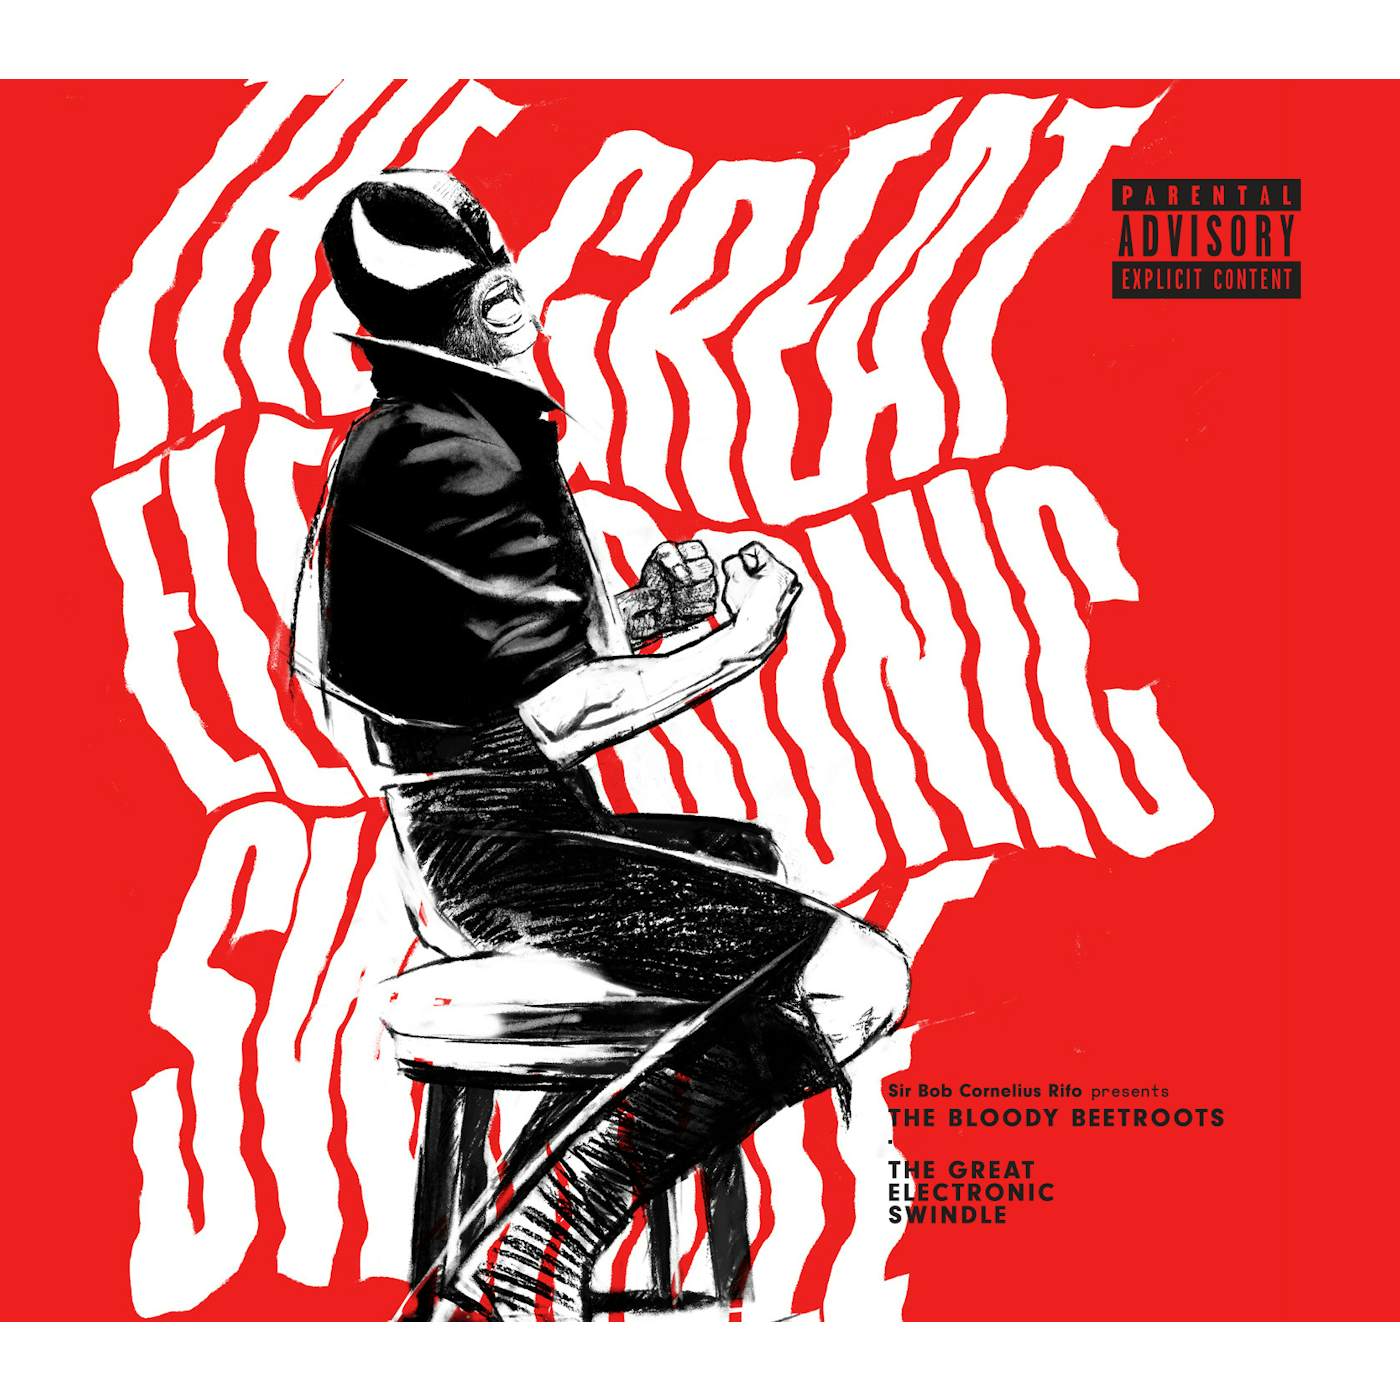 The Bloody Beetroots GREAT ELECTRONIC SWINDLE CD